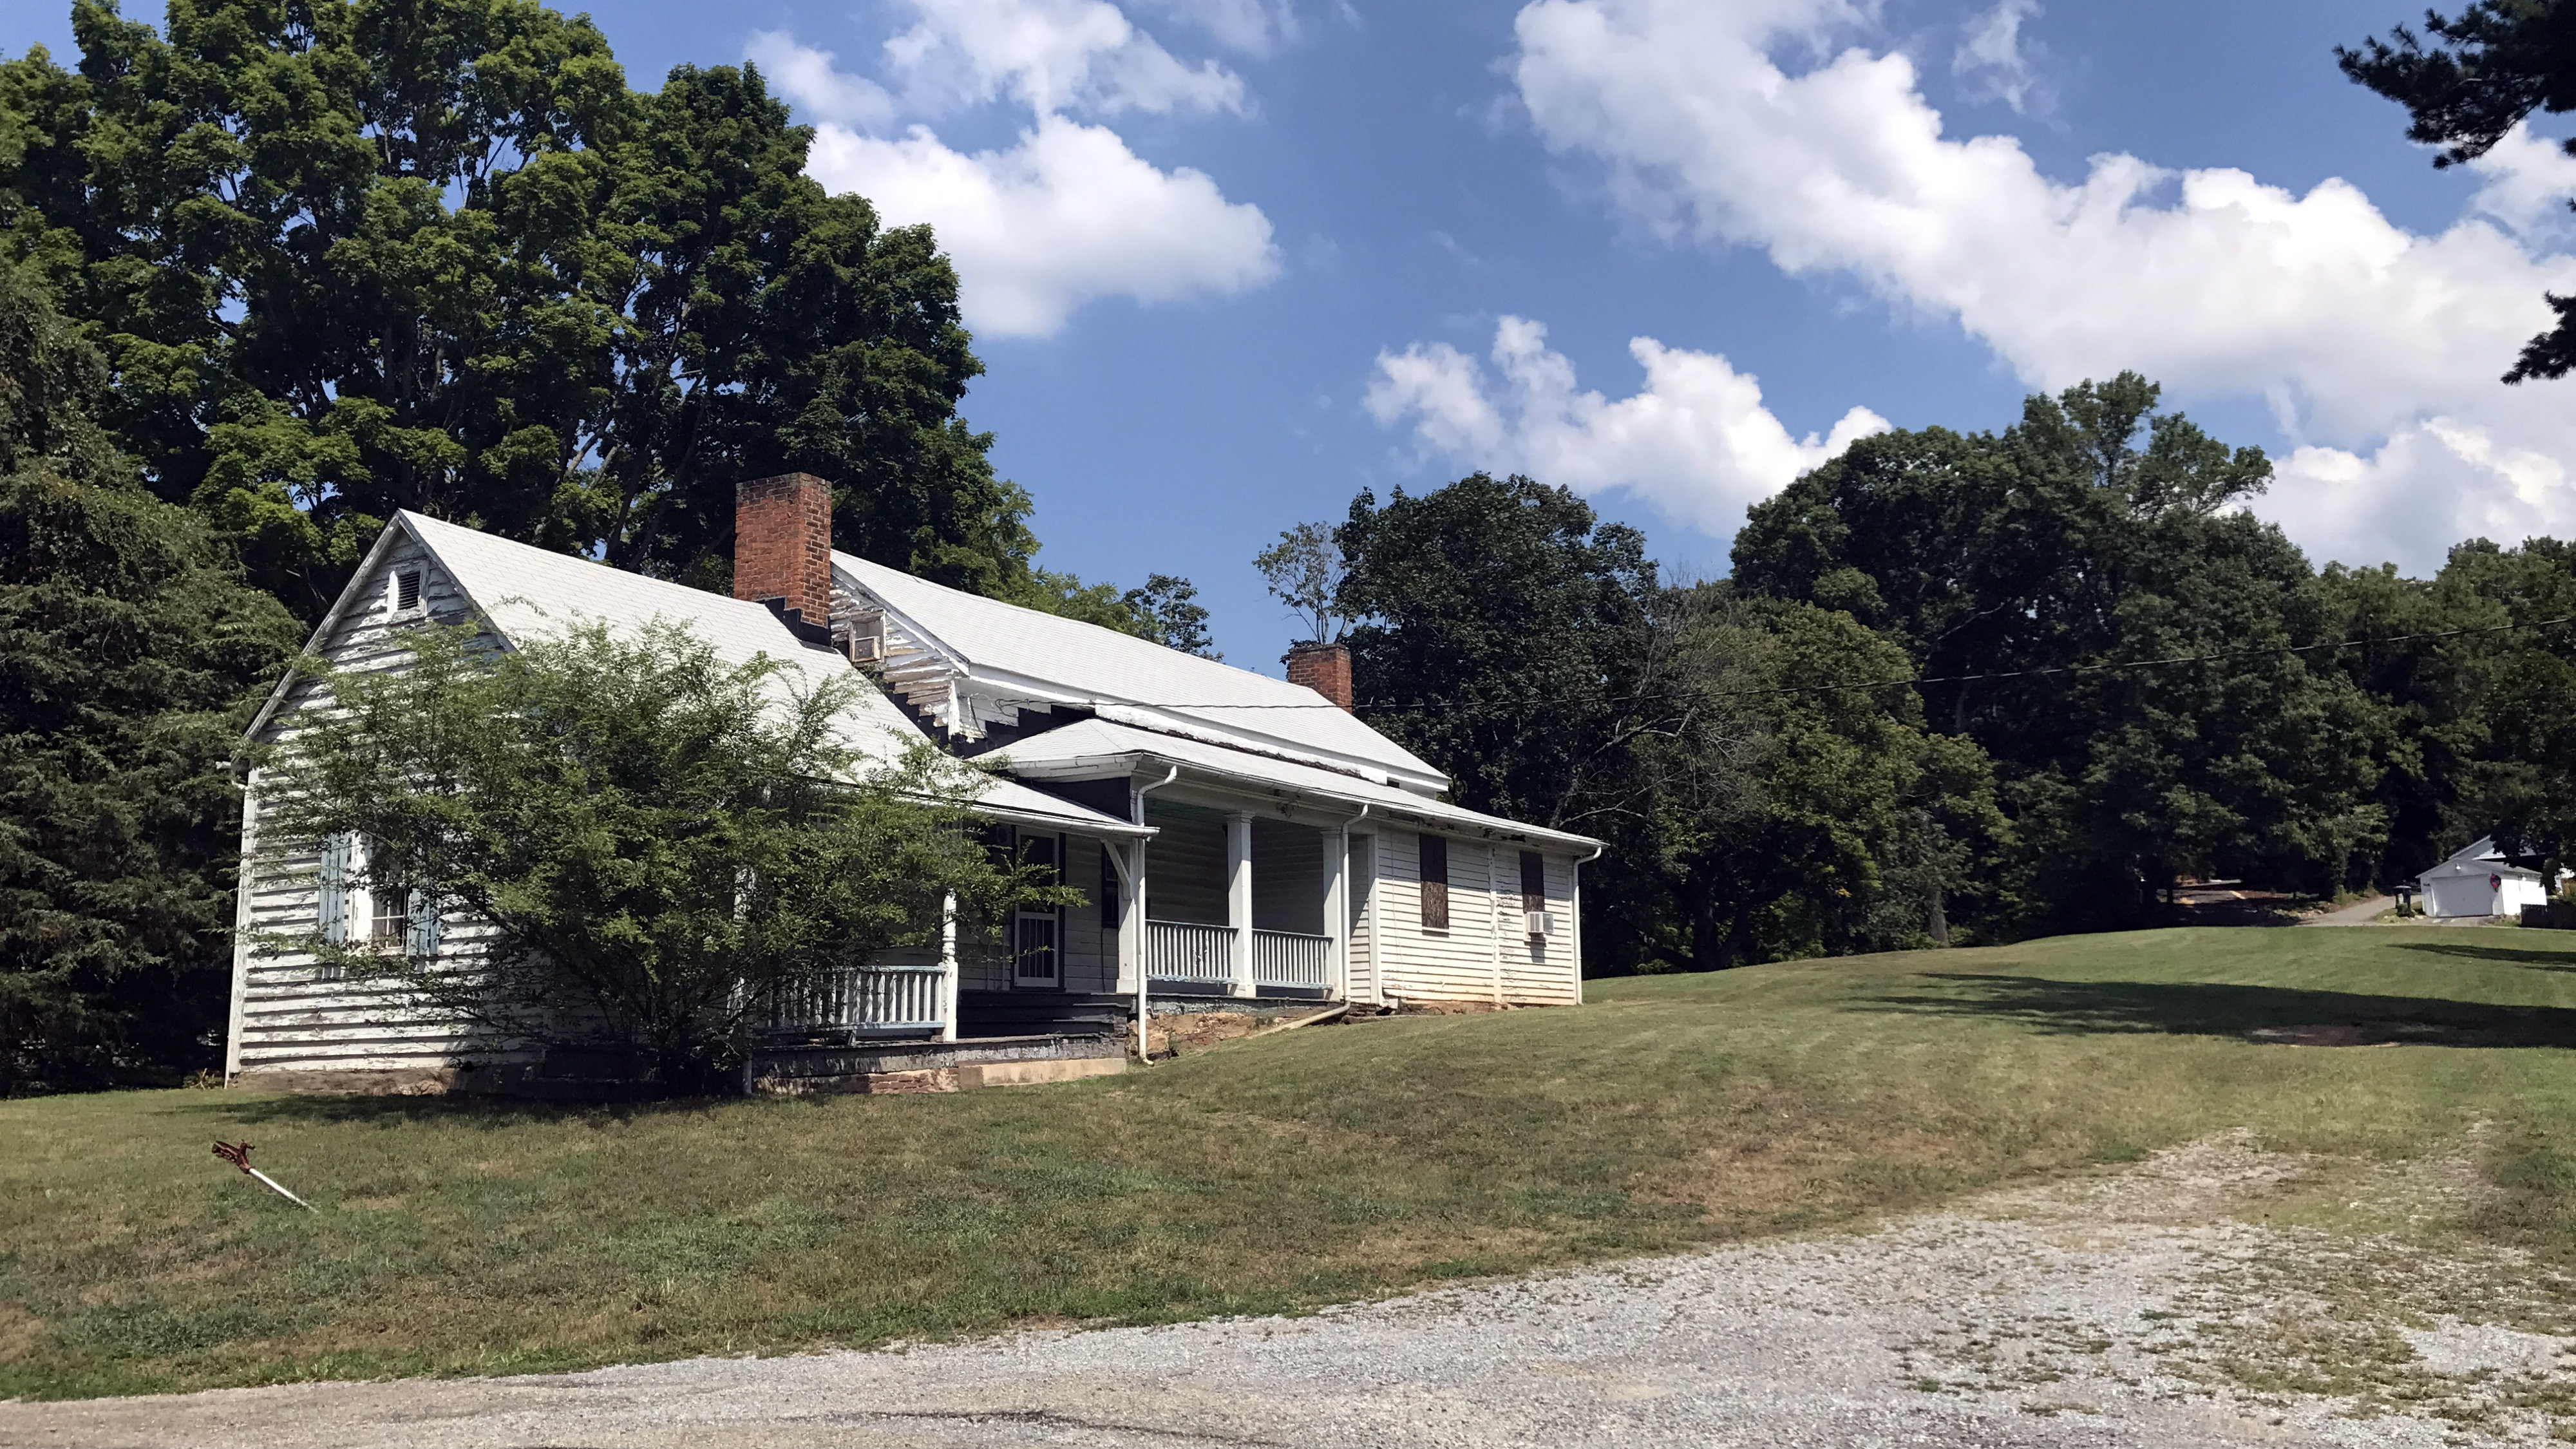 Roanoke proposes sale of historic cabin in Fishburn Park picture